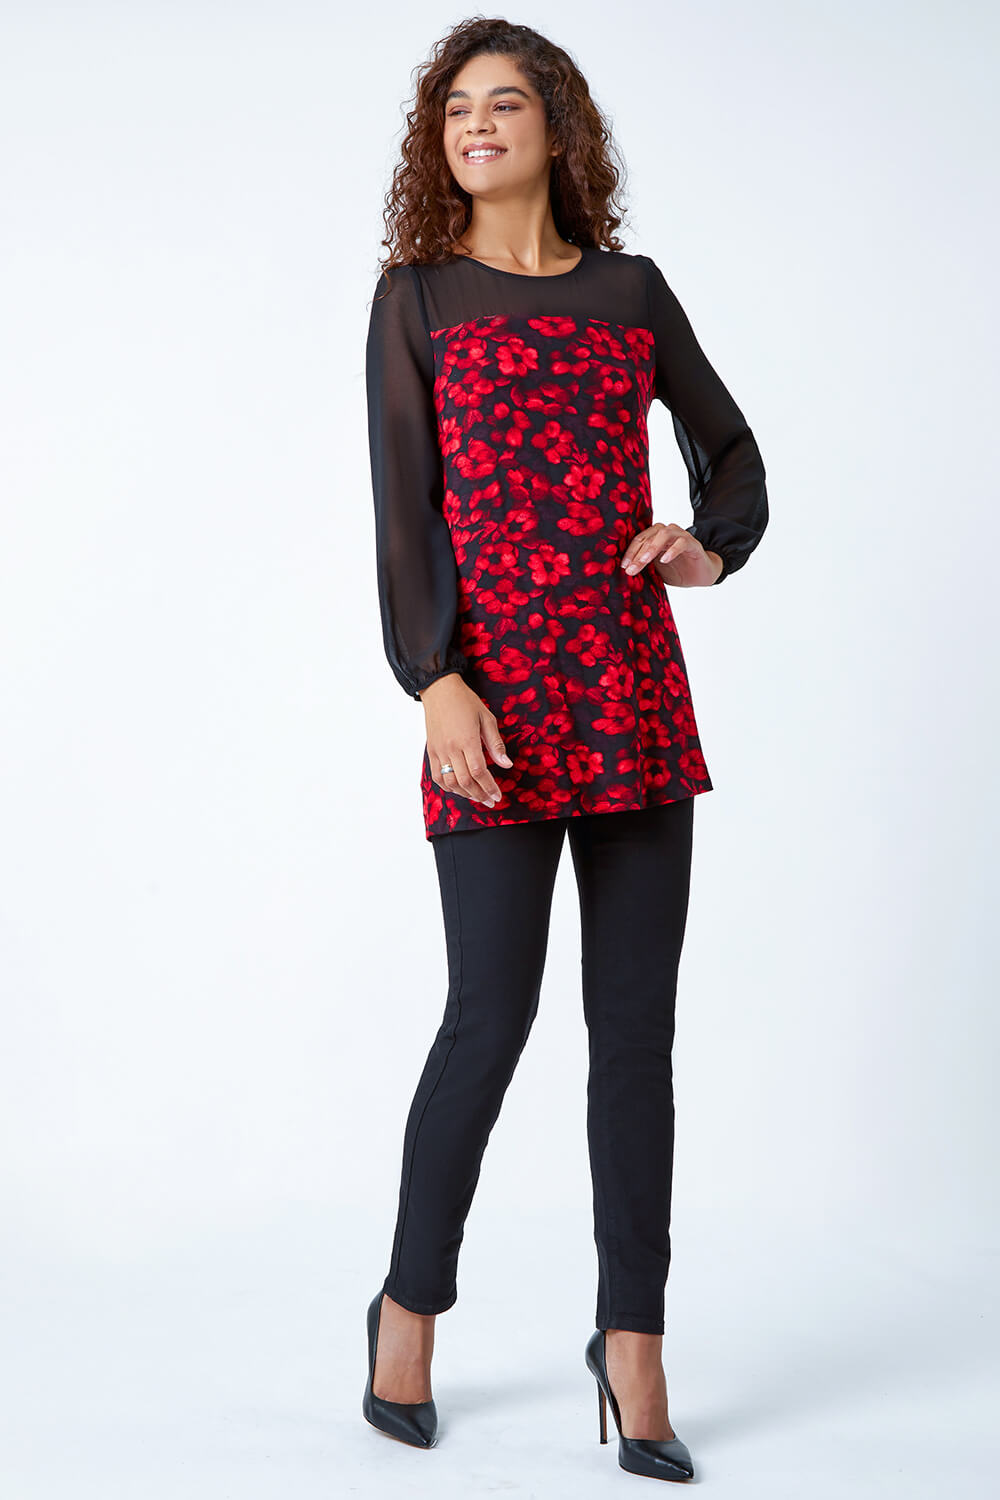 Red Floral Print Chiffon Sleeve Stretch Top, Image 4 of 5